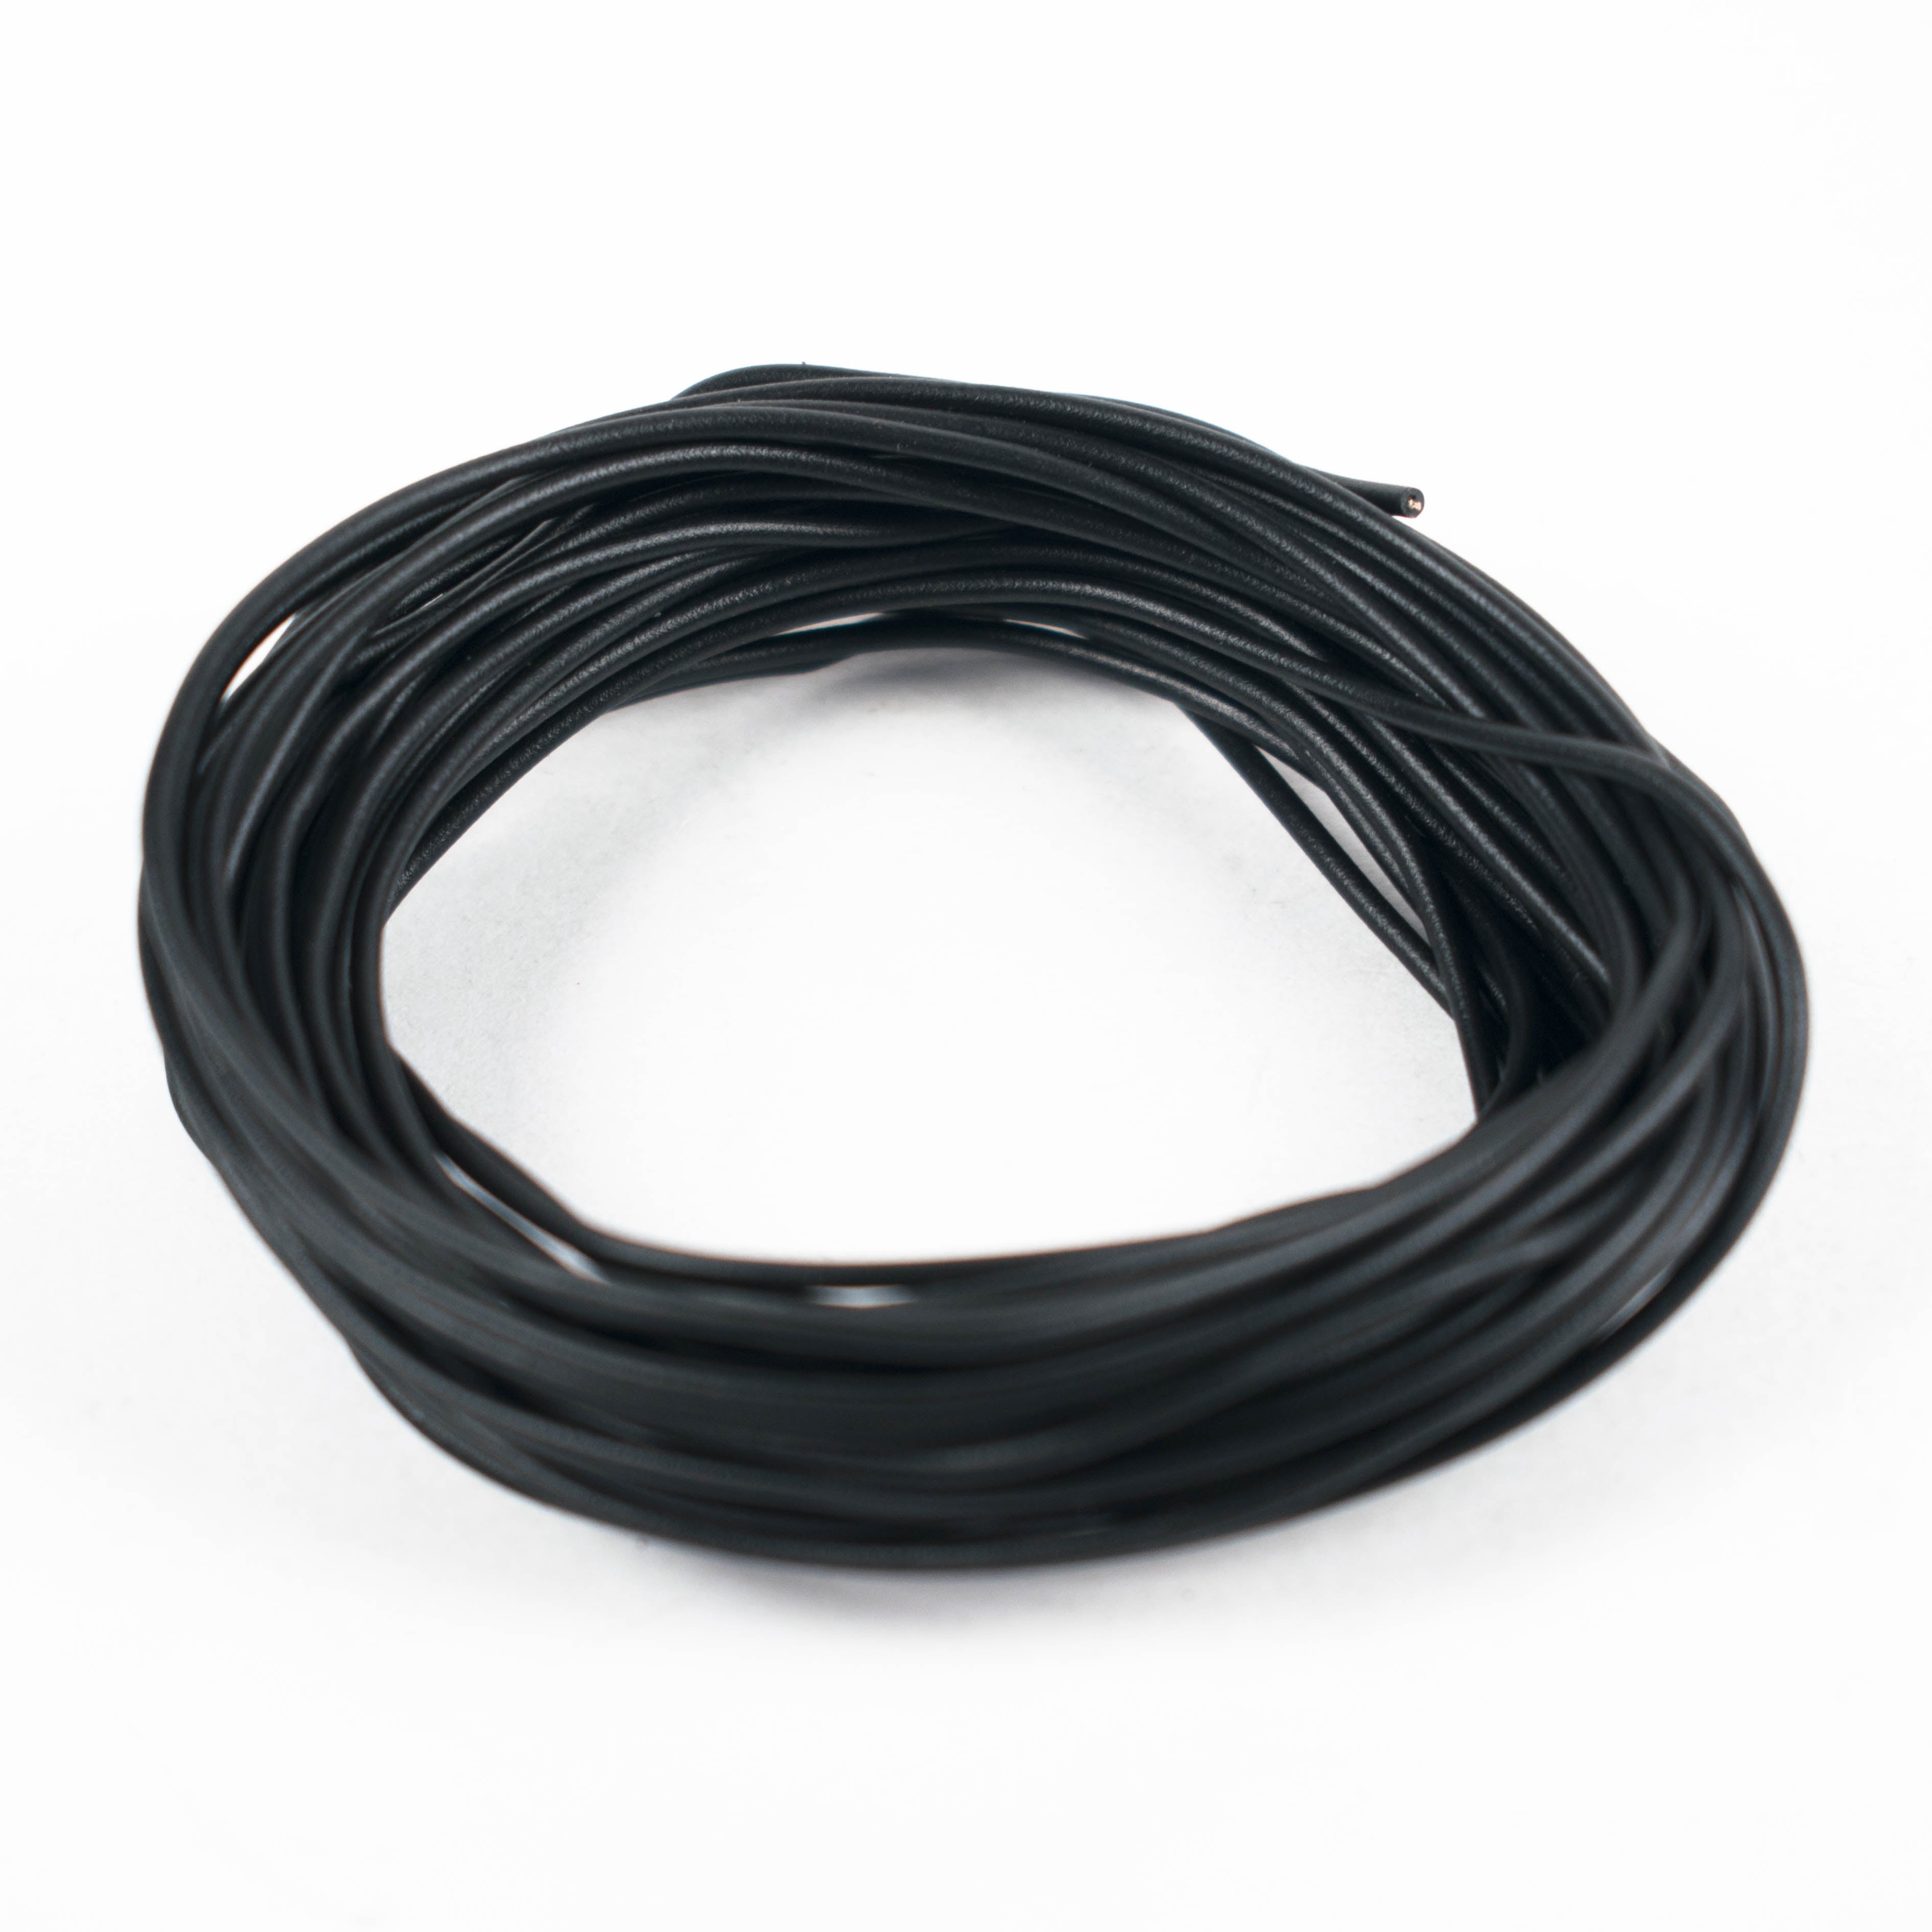 Buy 23 AWG Multi Strand Wire - 7/0.193mm 10 Meter at HNHCart.com